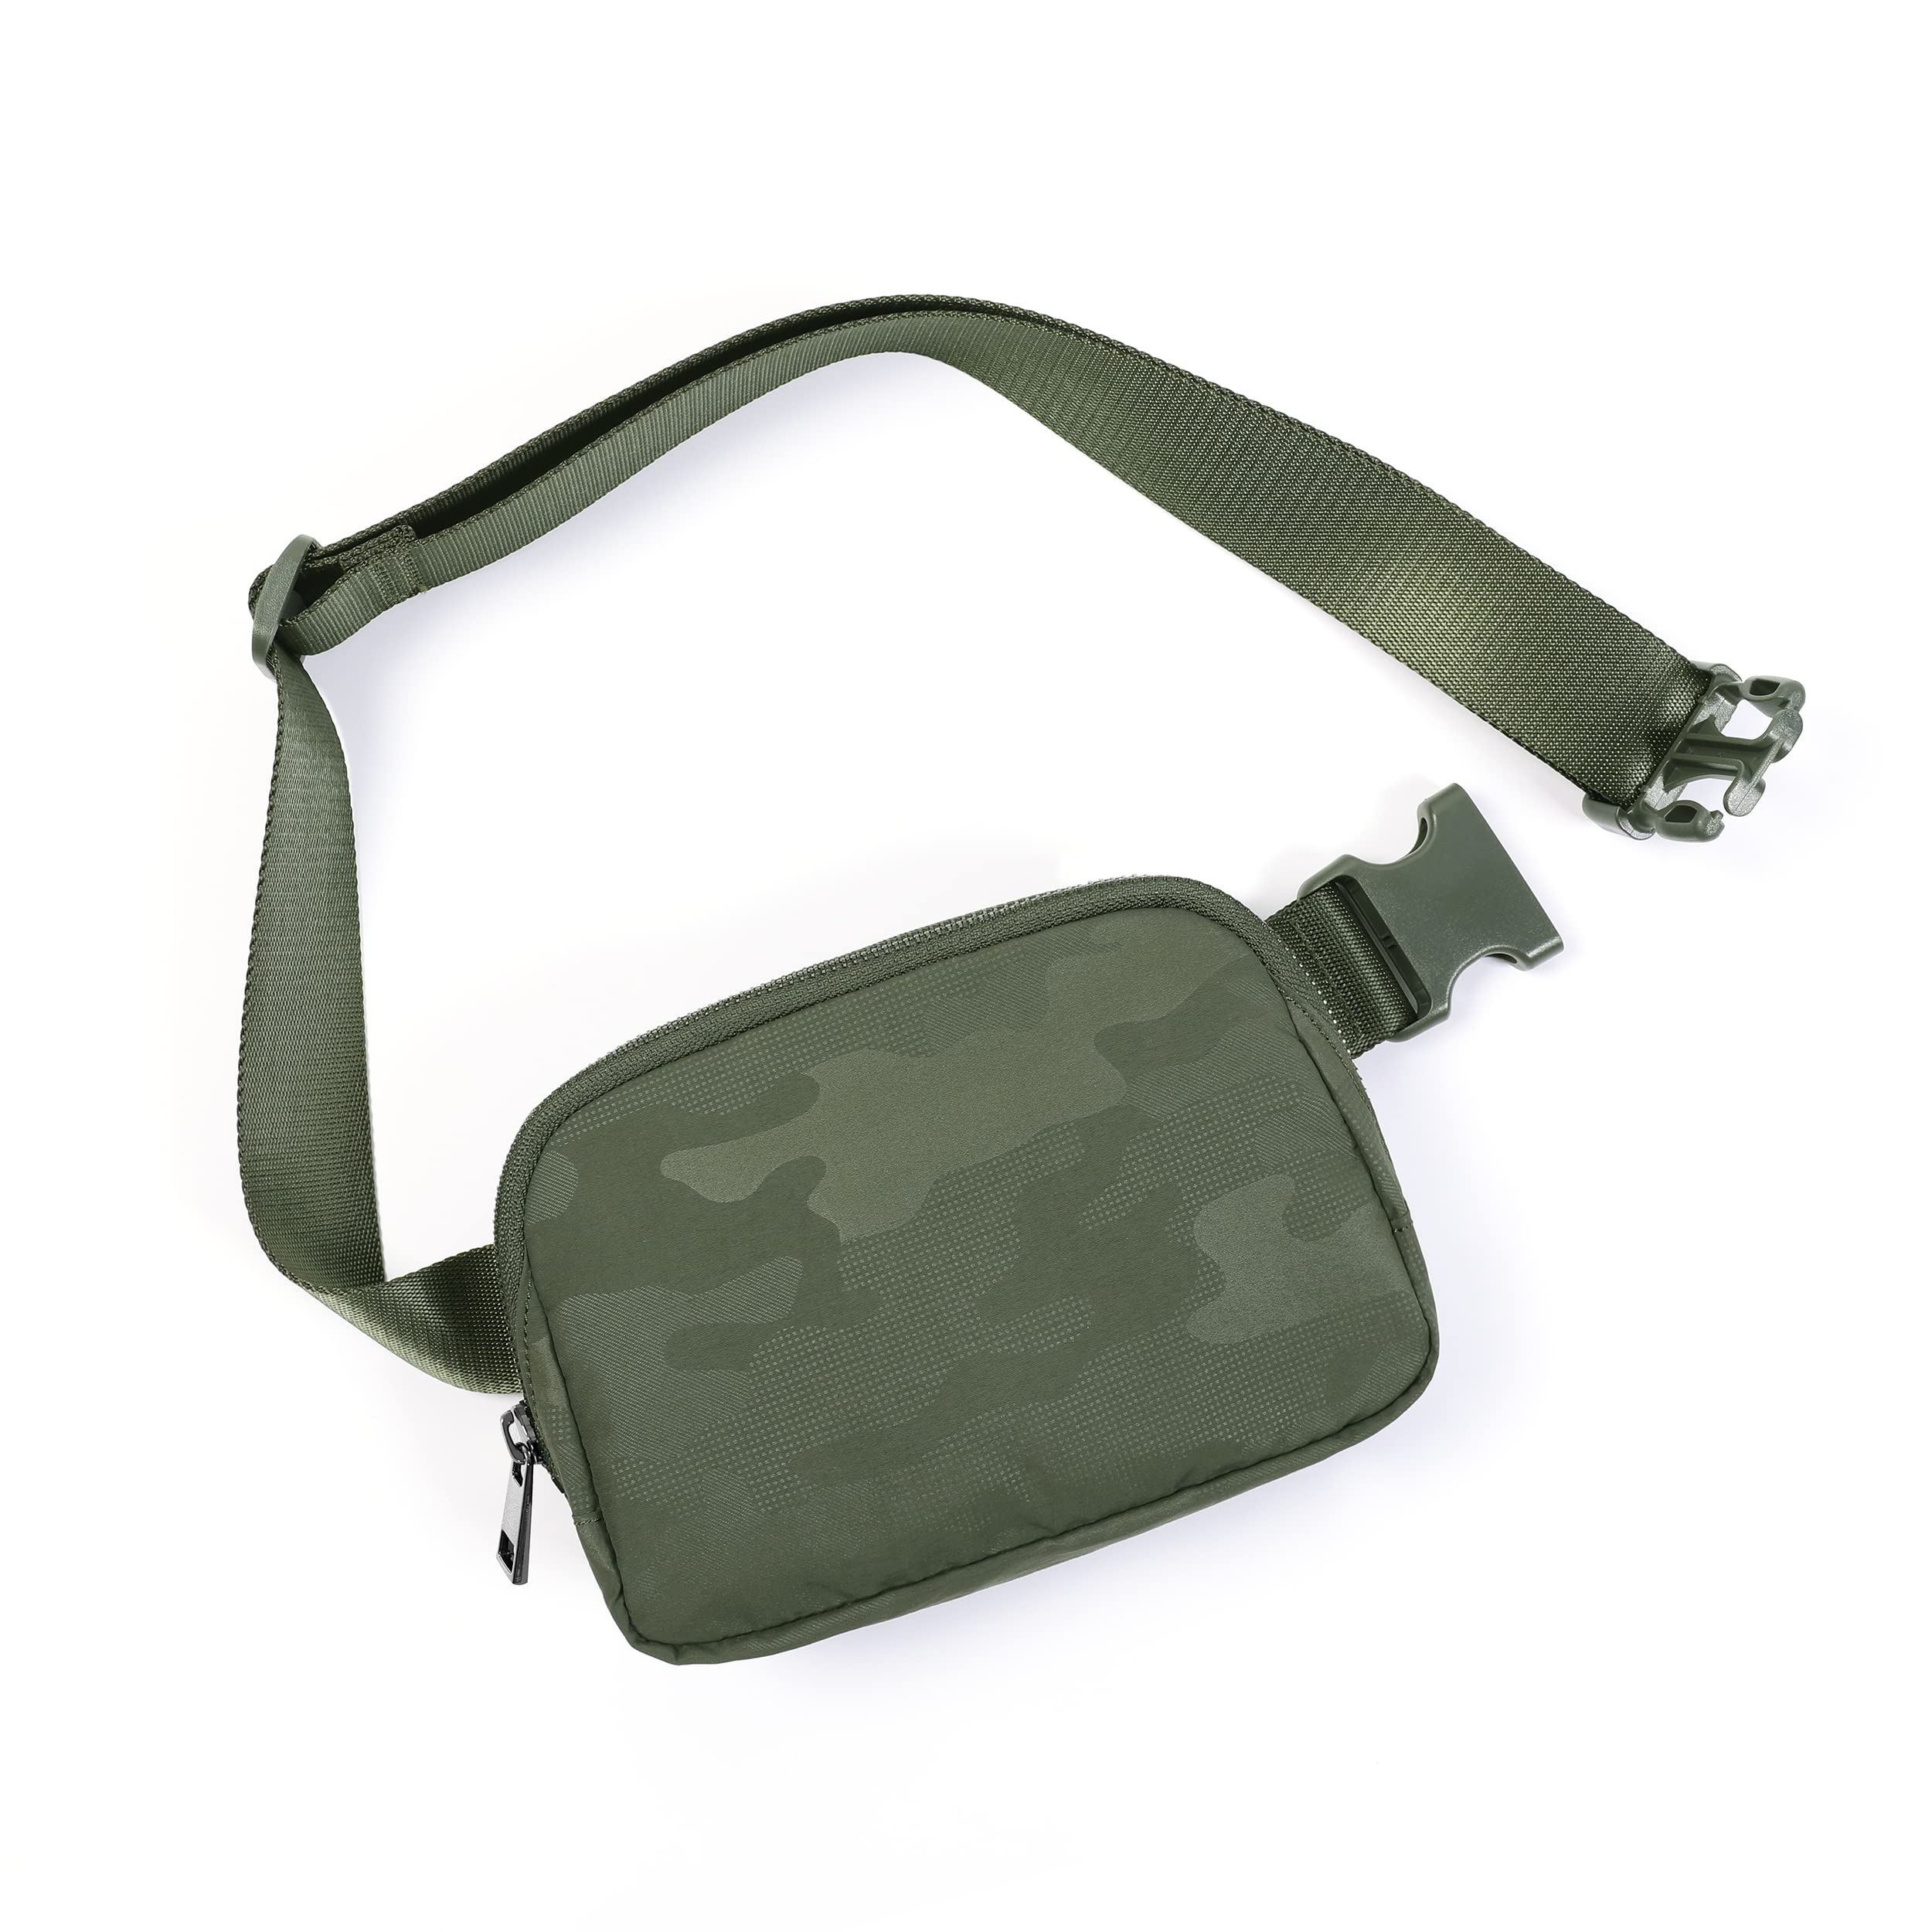 ODODOS Unisex Mini Belt Bag with Adjustable Strap Small Waist Pouch for Workout Running Traveling Hiking, Camo Green